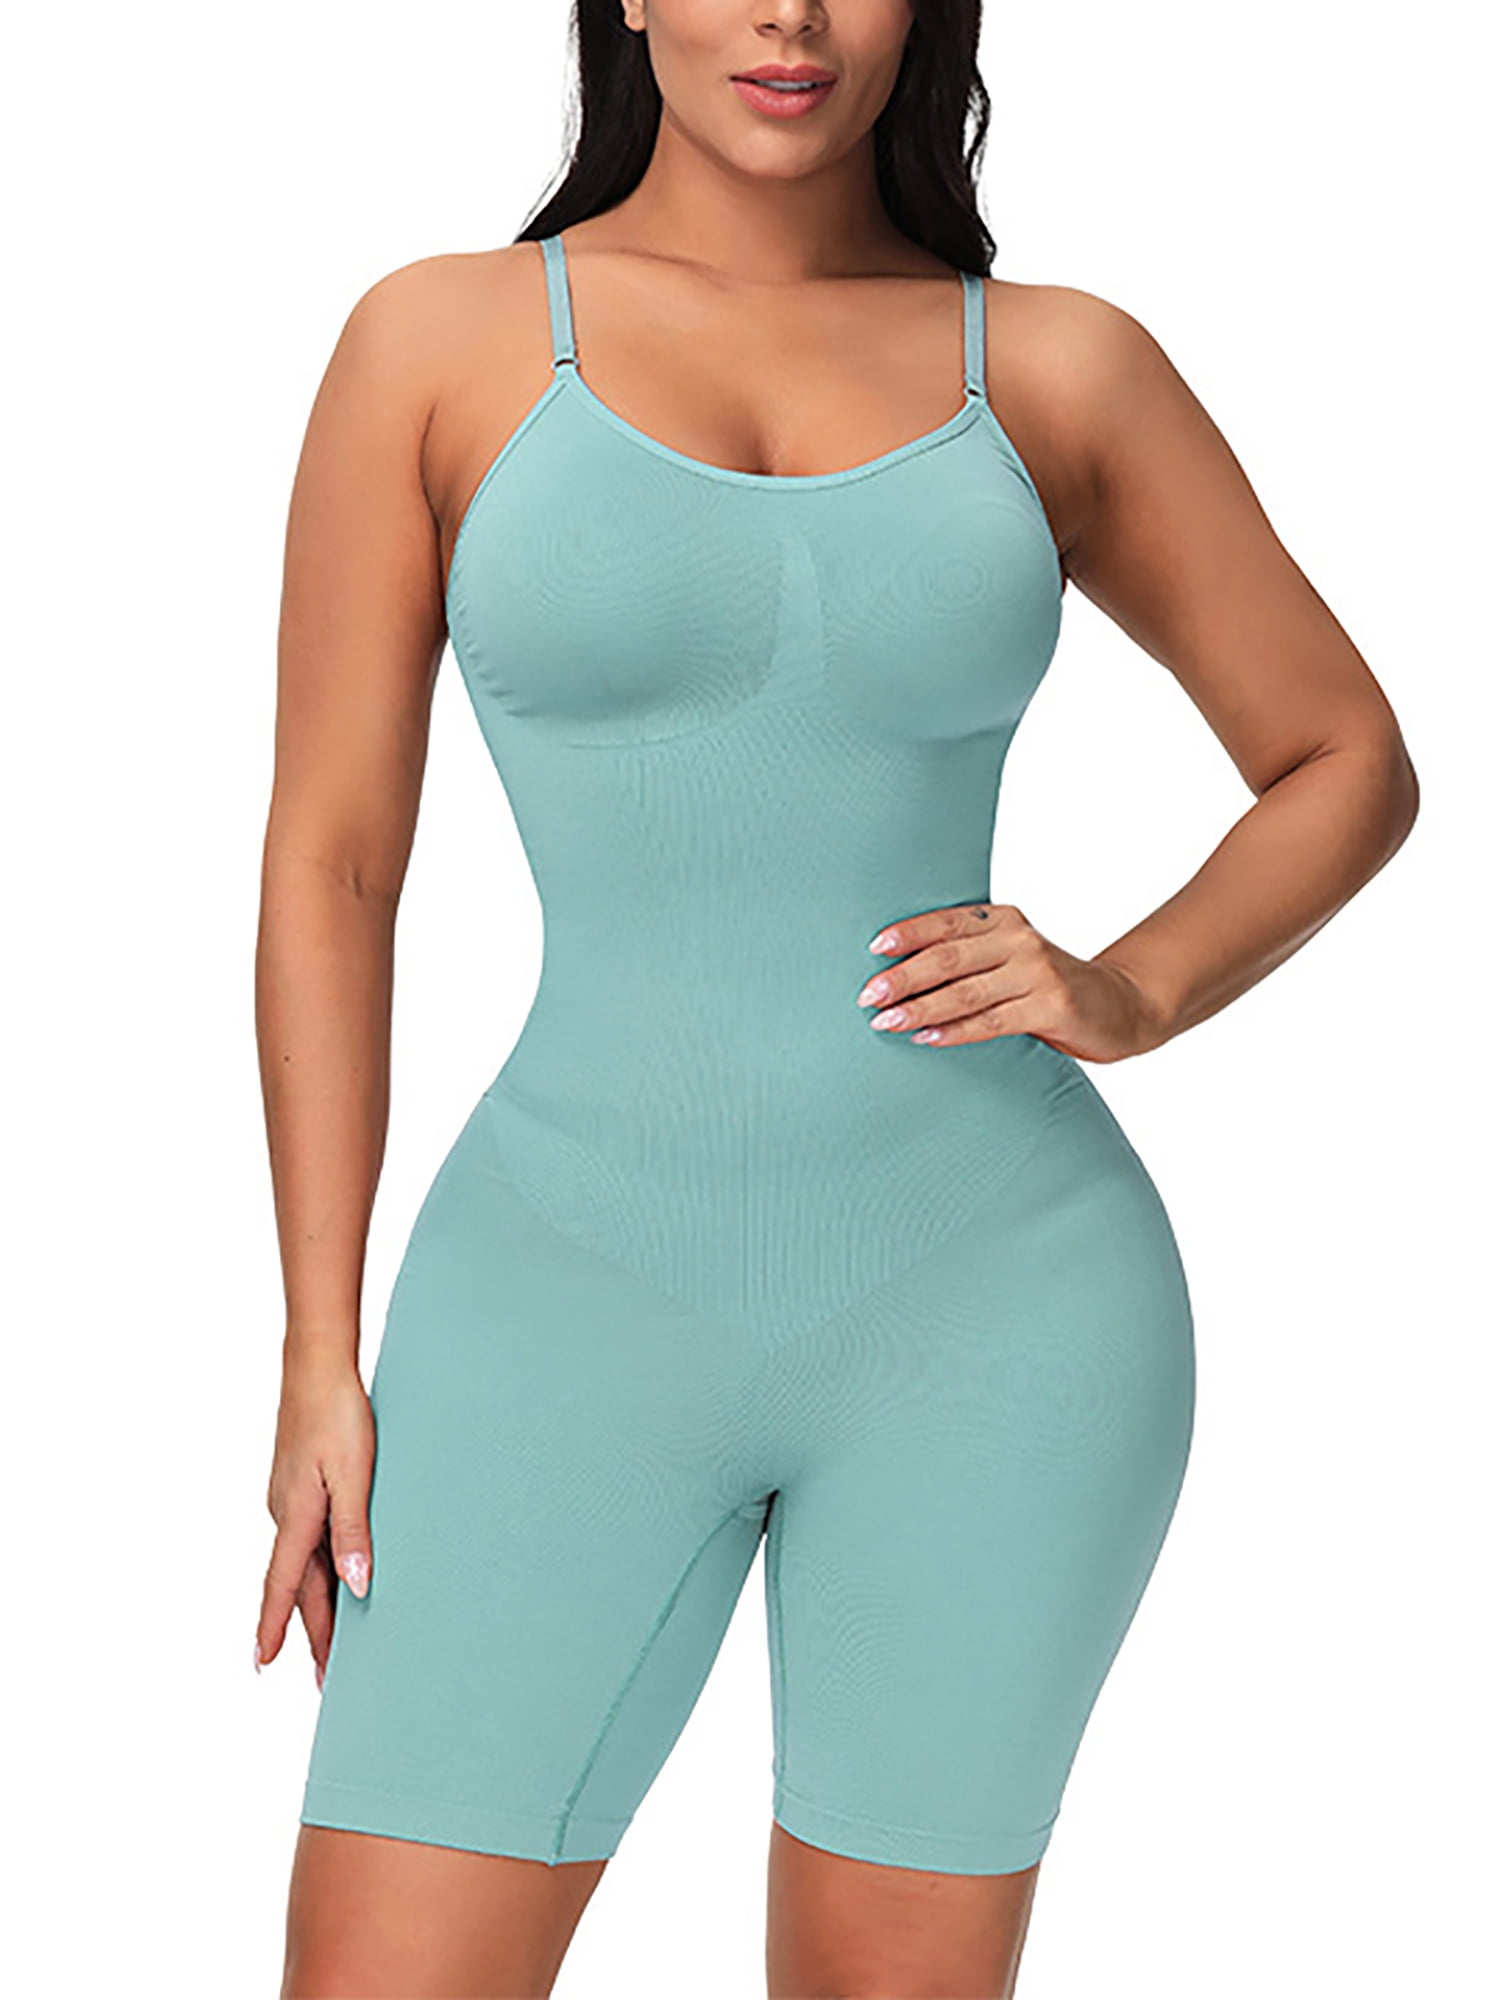 clothing-shoes-accessories-details-about-slimming-waist-trainer